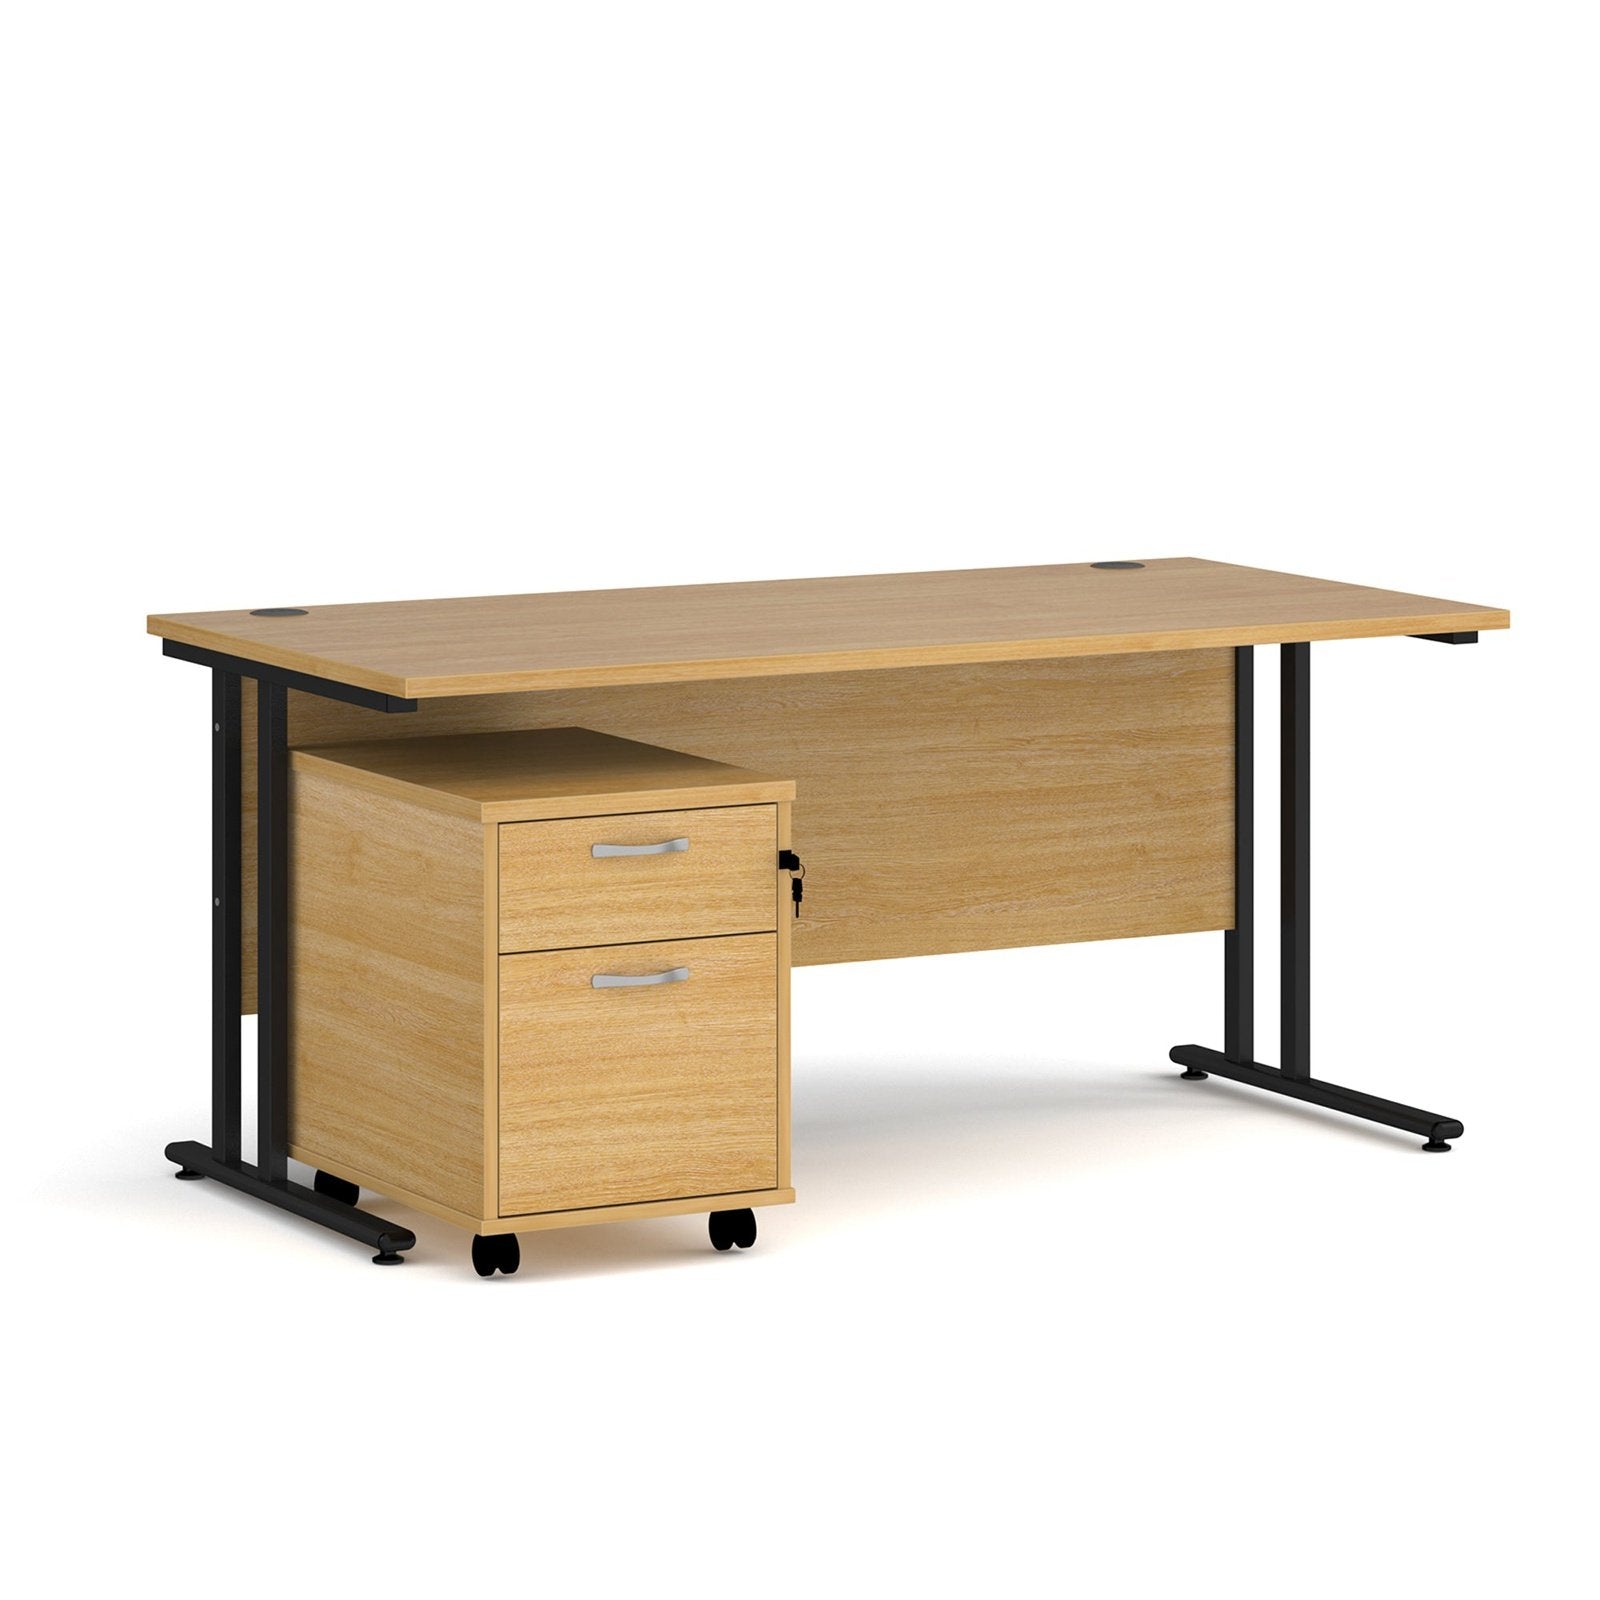 Maestro 25 cantilever leg straight desk 800 deep with 2 drawer mobile pedestal - Office Products Online